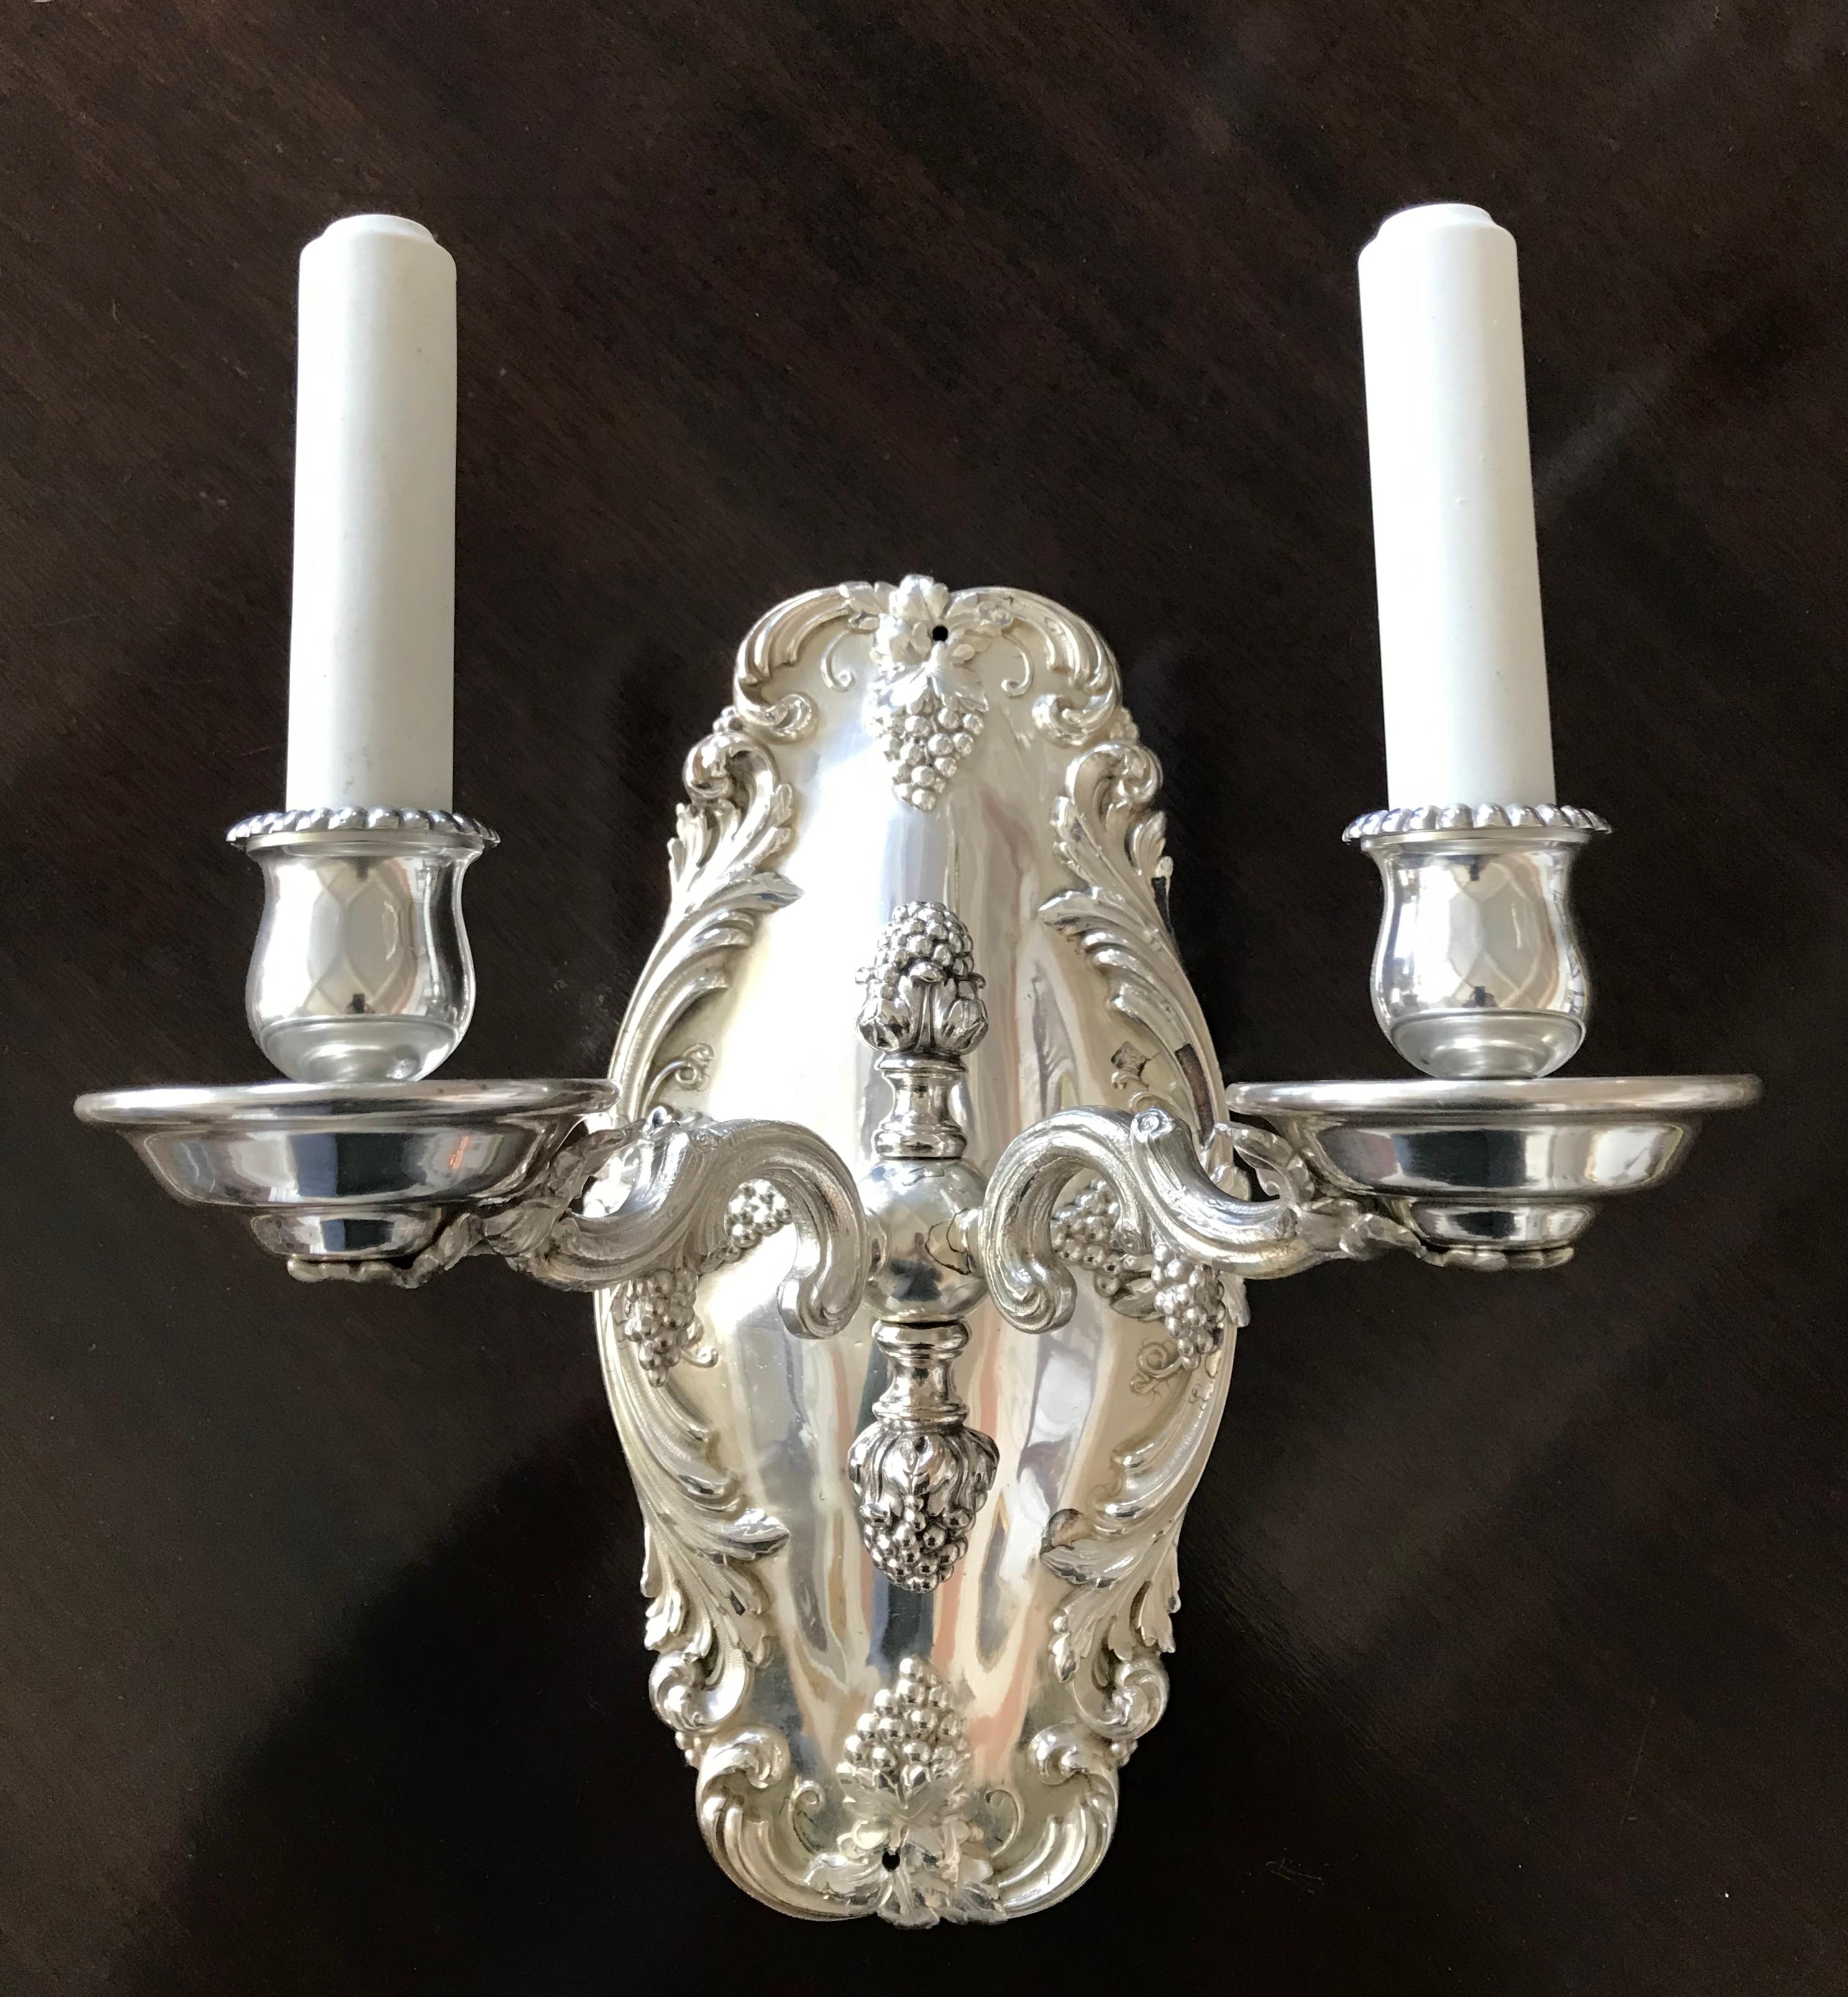 This impressive pair of signed Caldwell silver sconces feature vintage motifs including grapes, vines and leaves. They have been newly rewired and are ready for use.